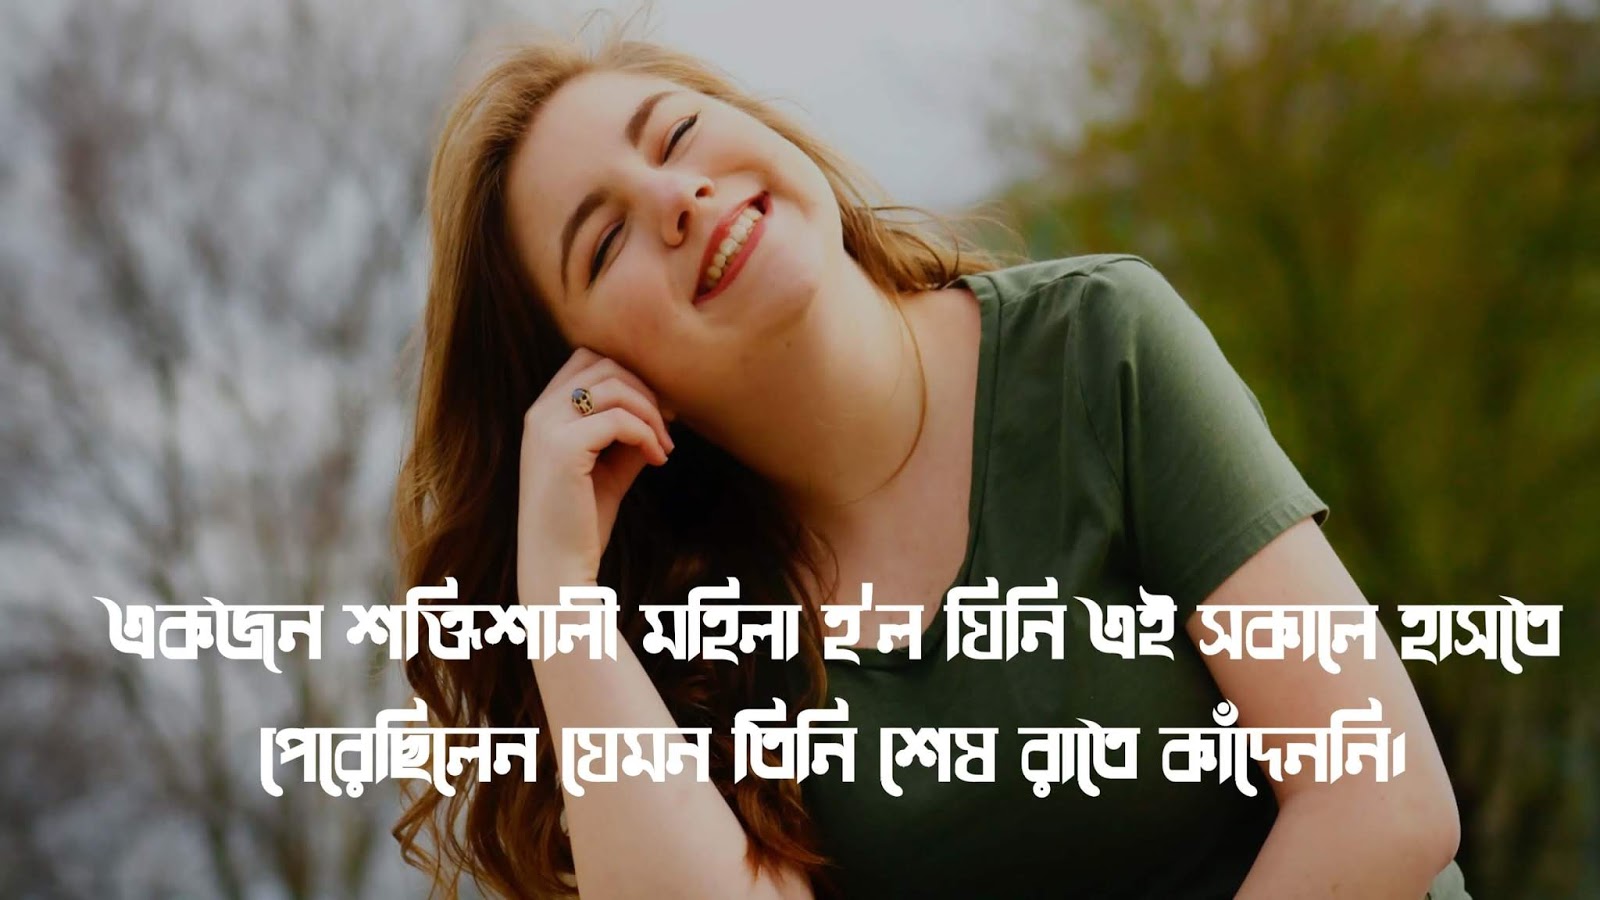 Quotes on Bengali Girl